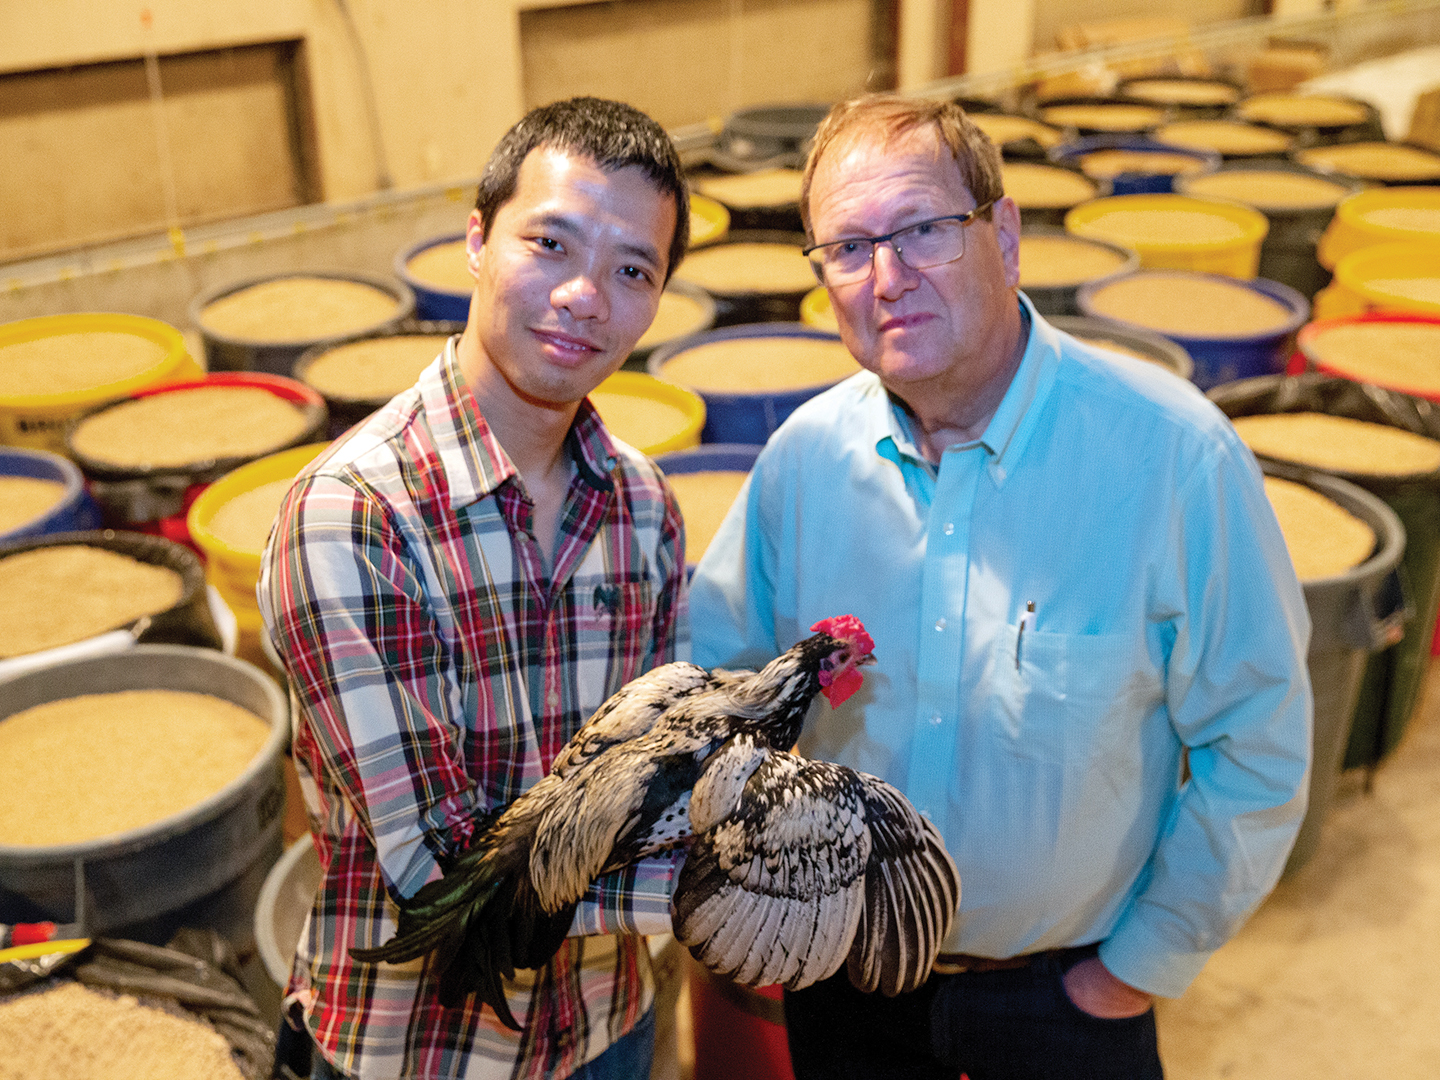 Dr. Jingyi Li displays a chicken's multicolor feathers, standing next to Dr. Leif Andersson in front of colorful barrels full of chicken feed